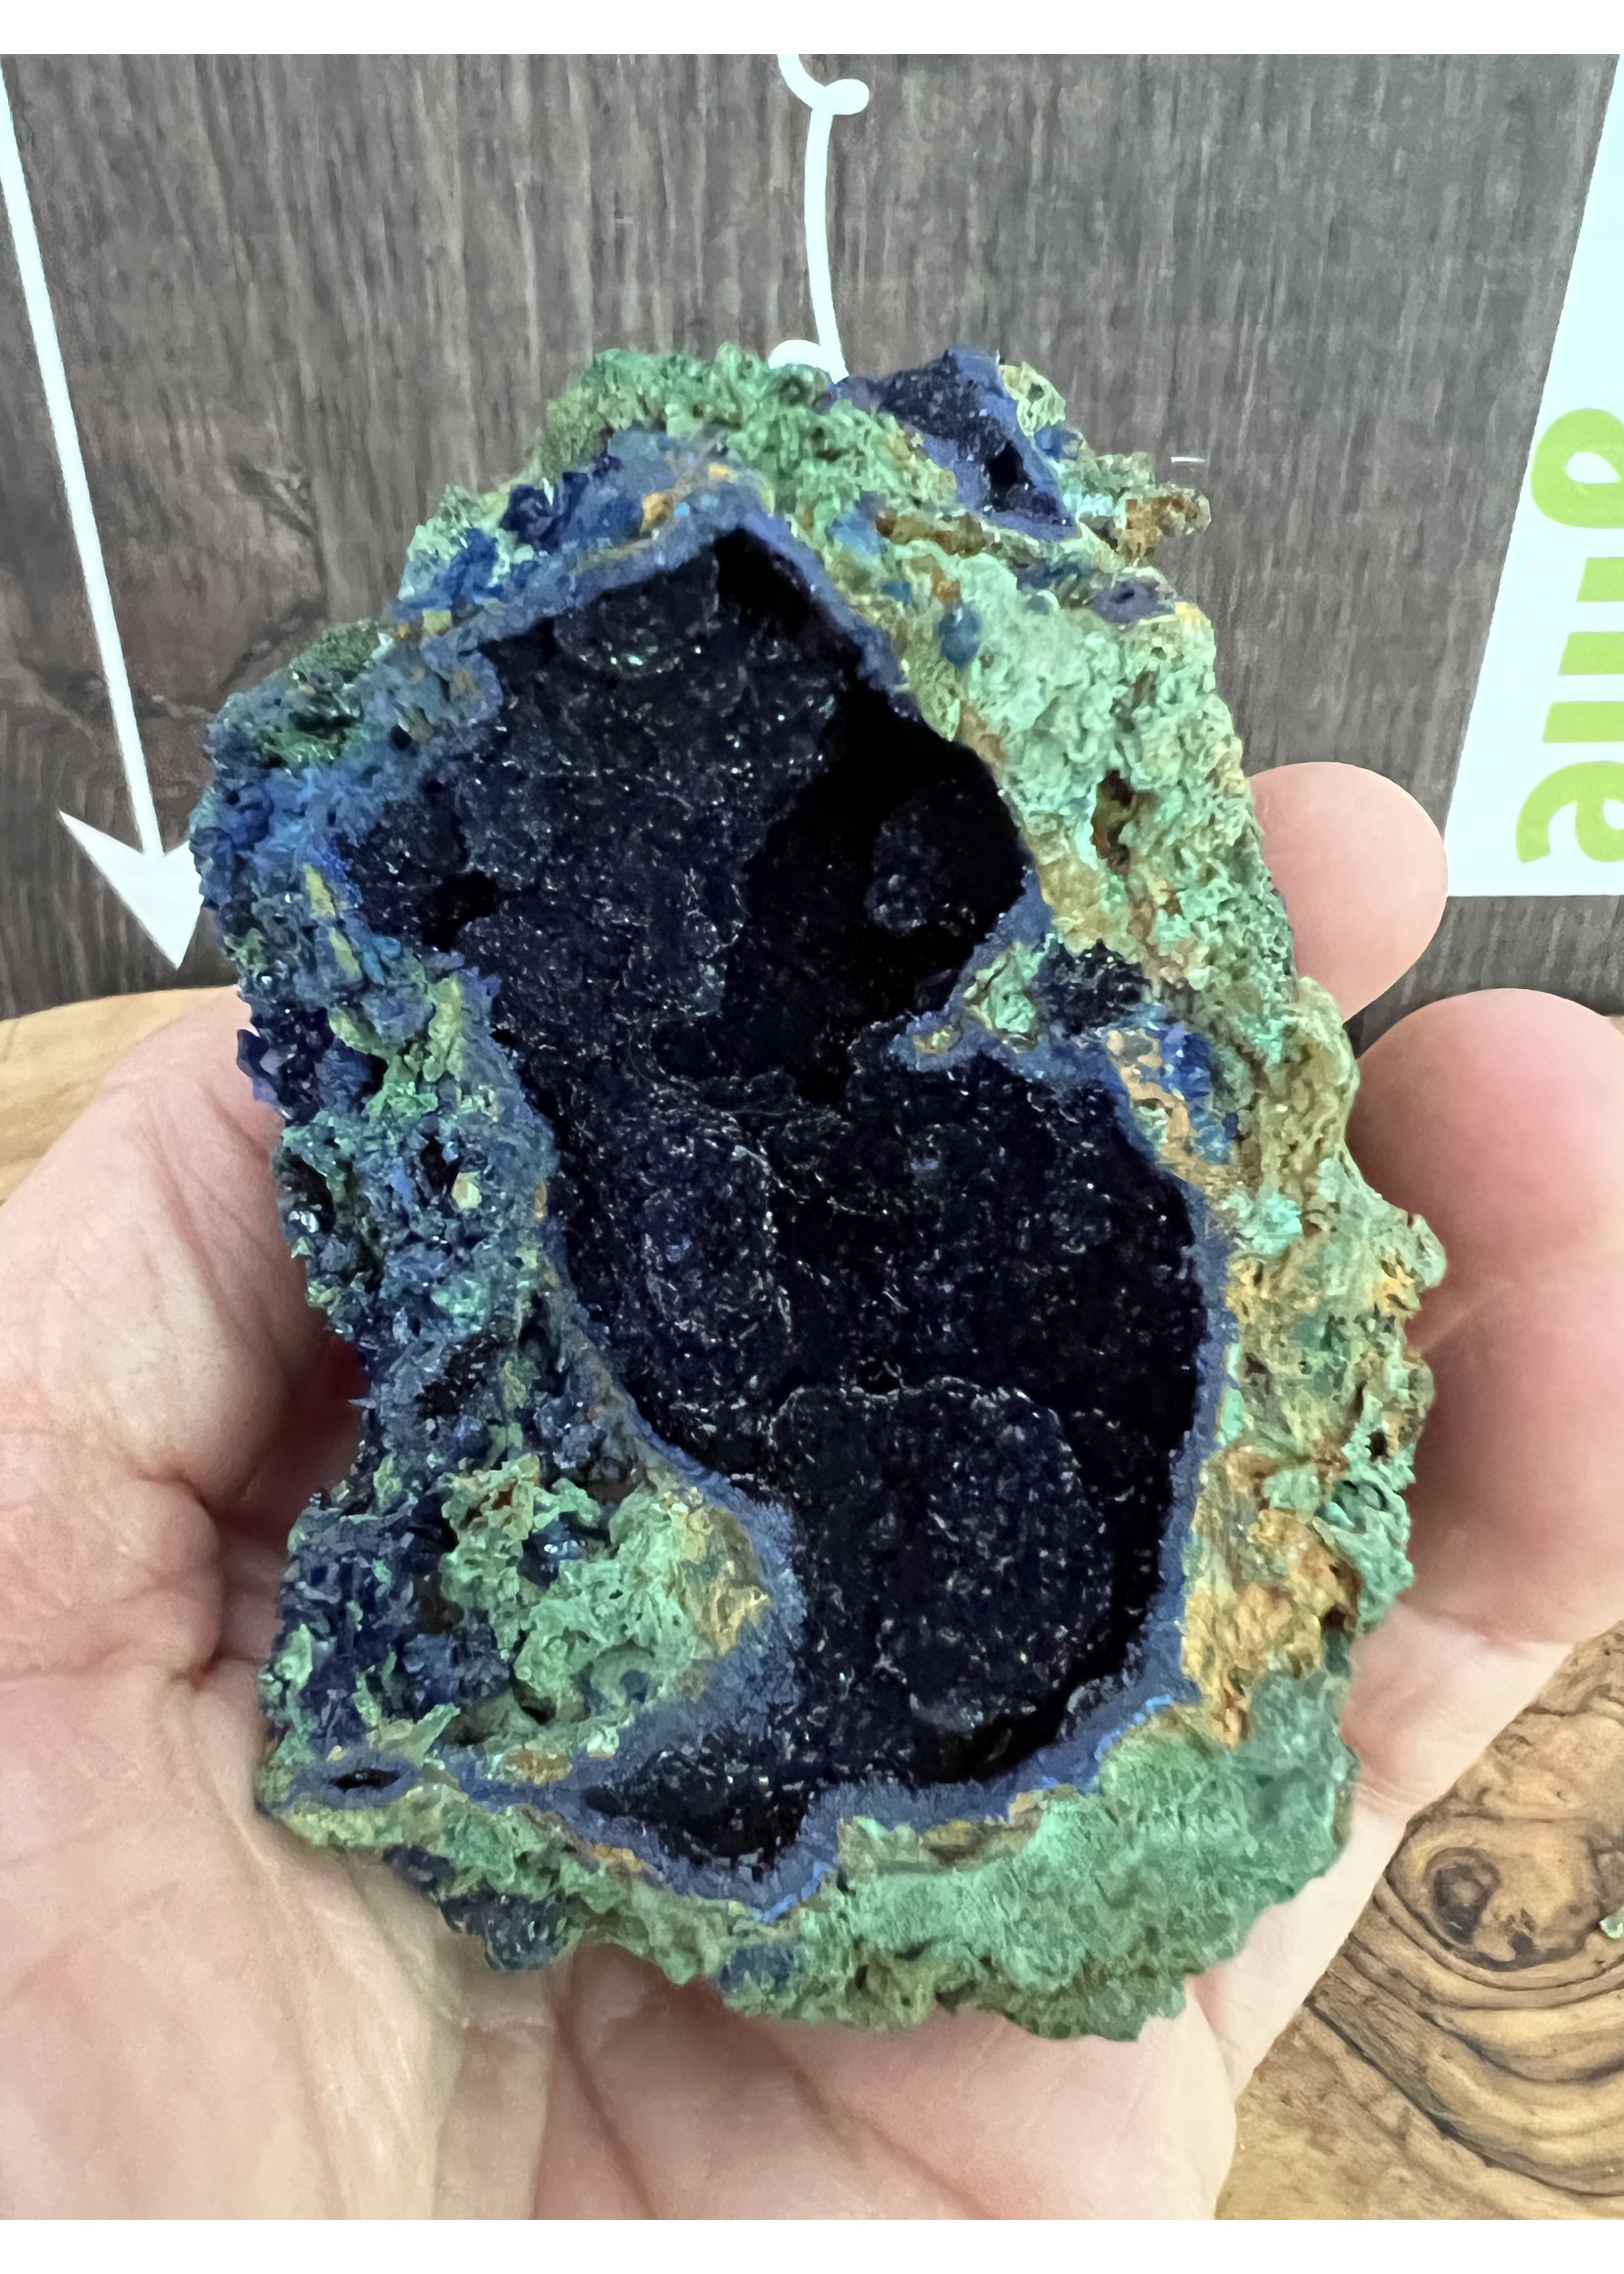 breathtaking azurite malachite rough, stimulates creativity, helps with concentration, great stone for astral travel